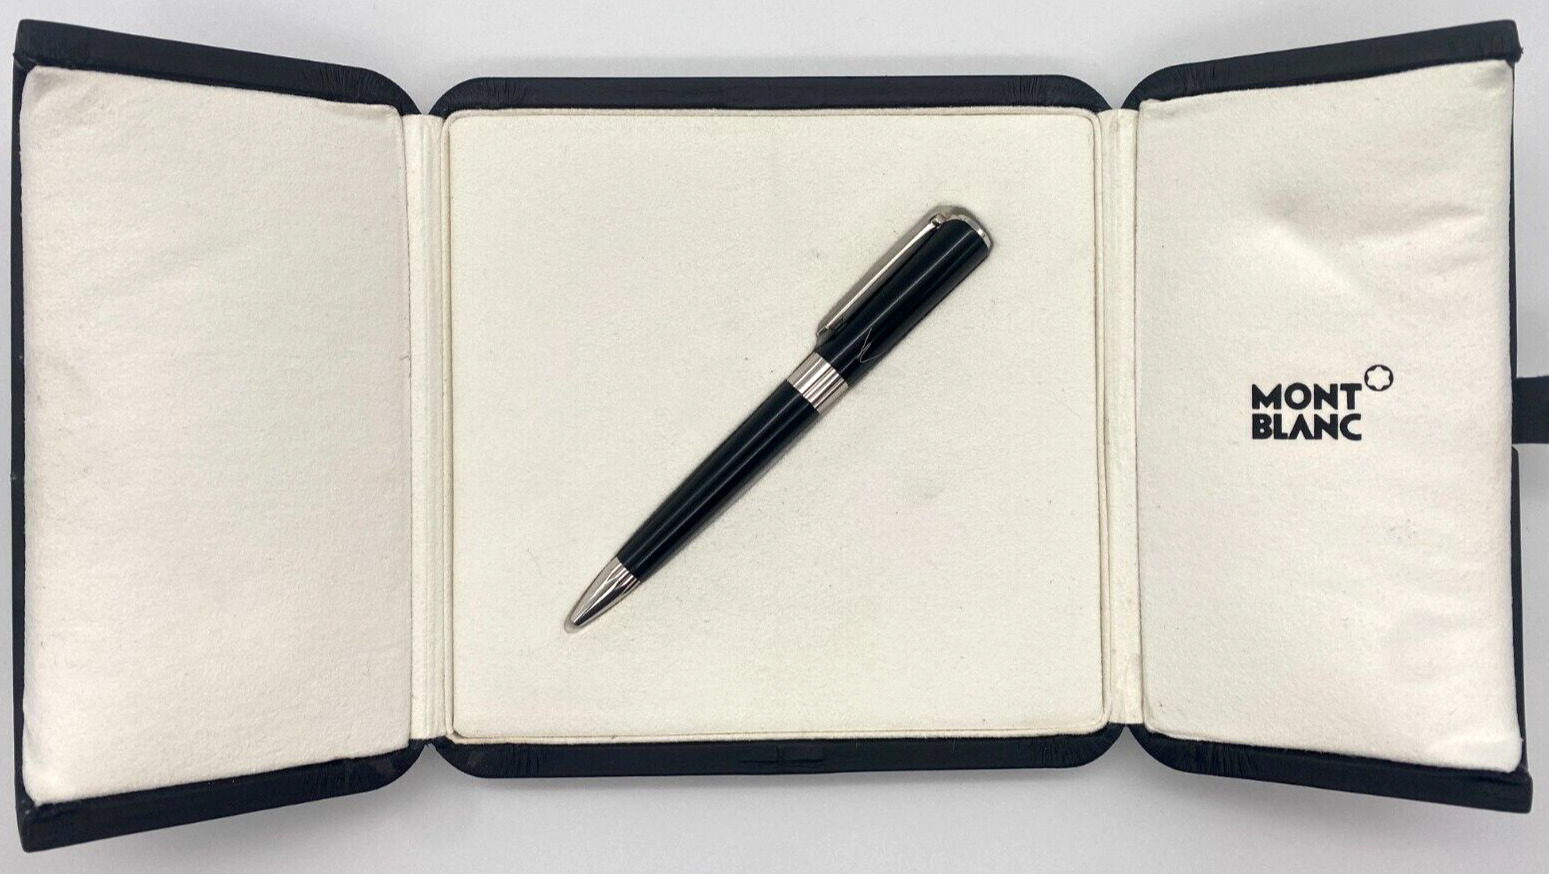 Montblanc Muses Line Marlene Dietrich Special Edition Ballpoint Pen